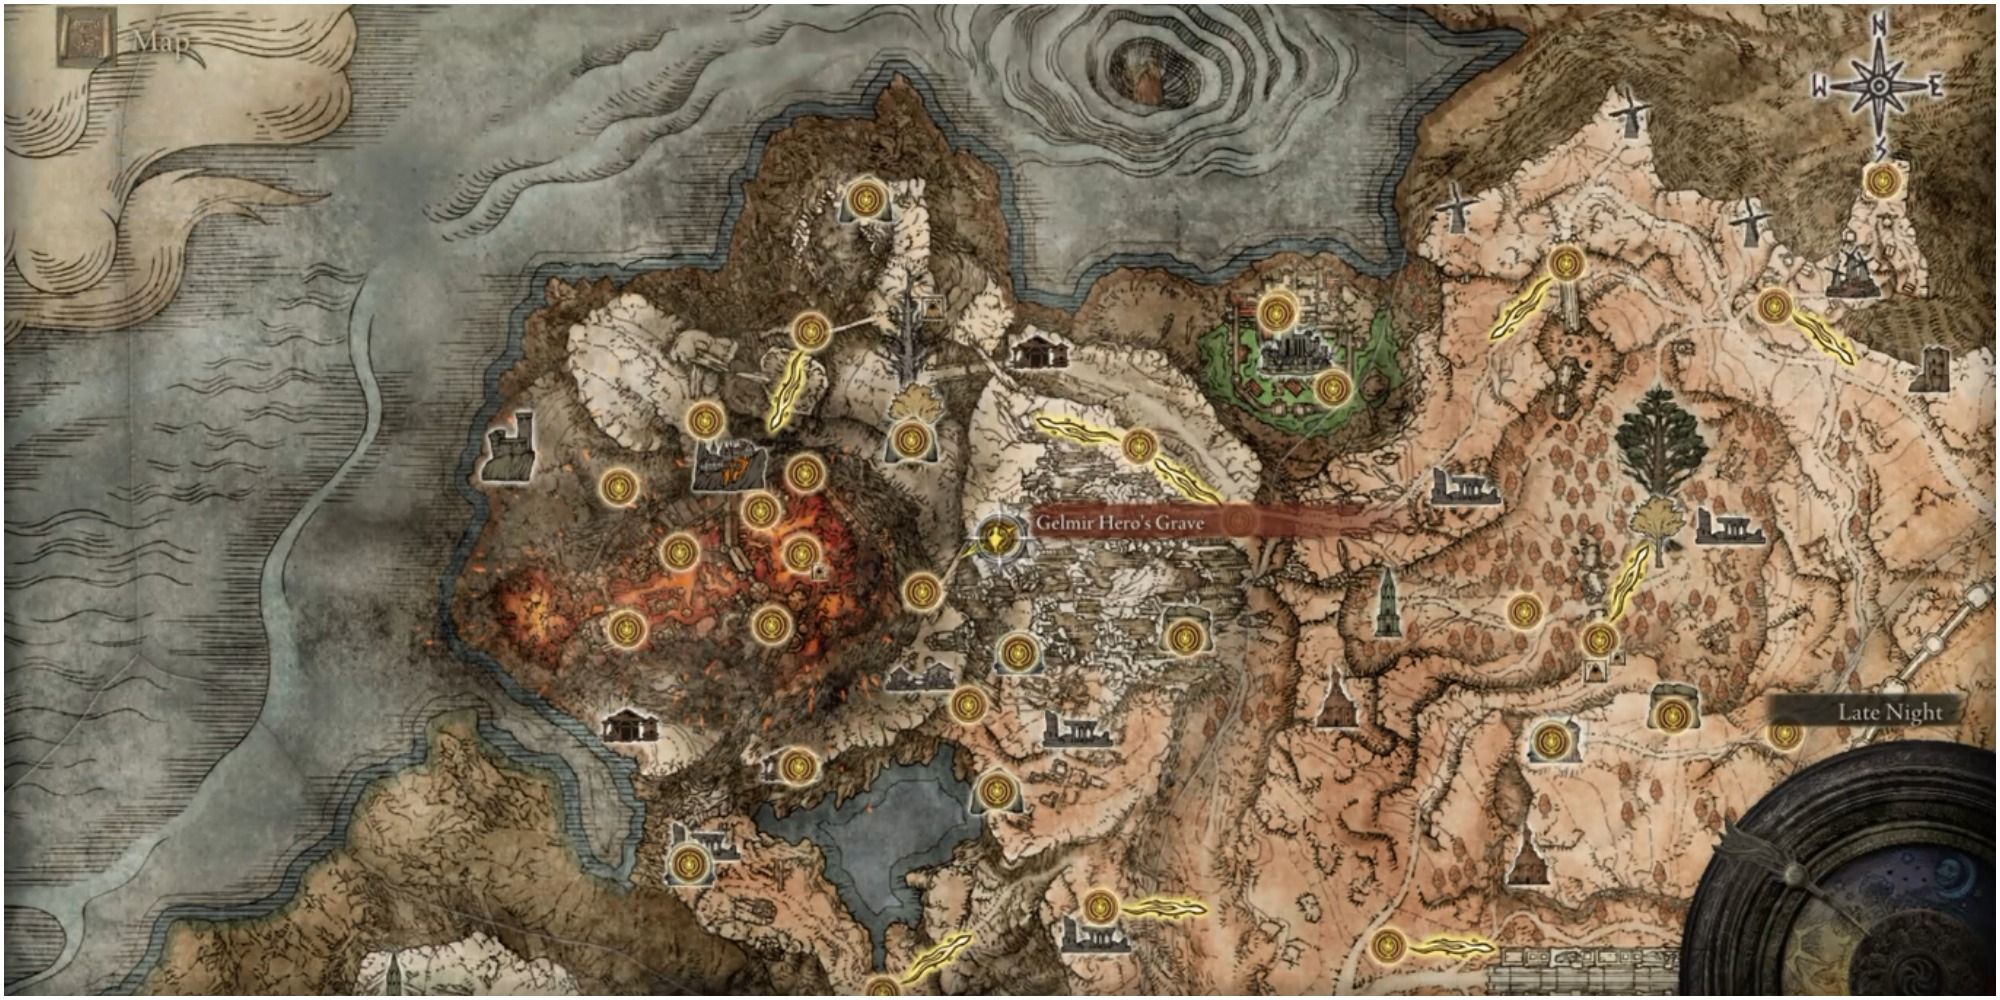 The map showing the location of Gelmir Hero's Grave.